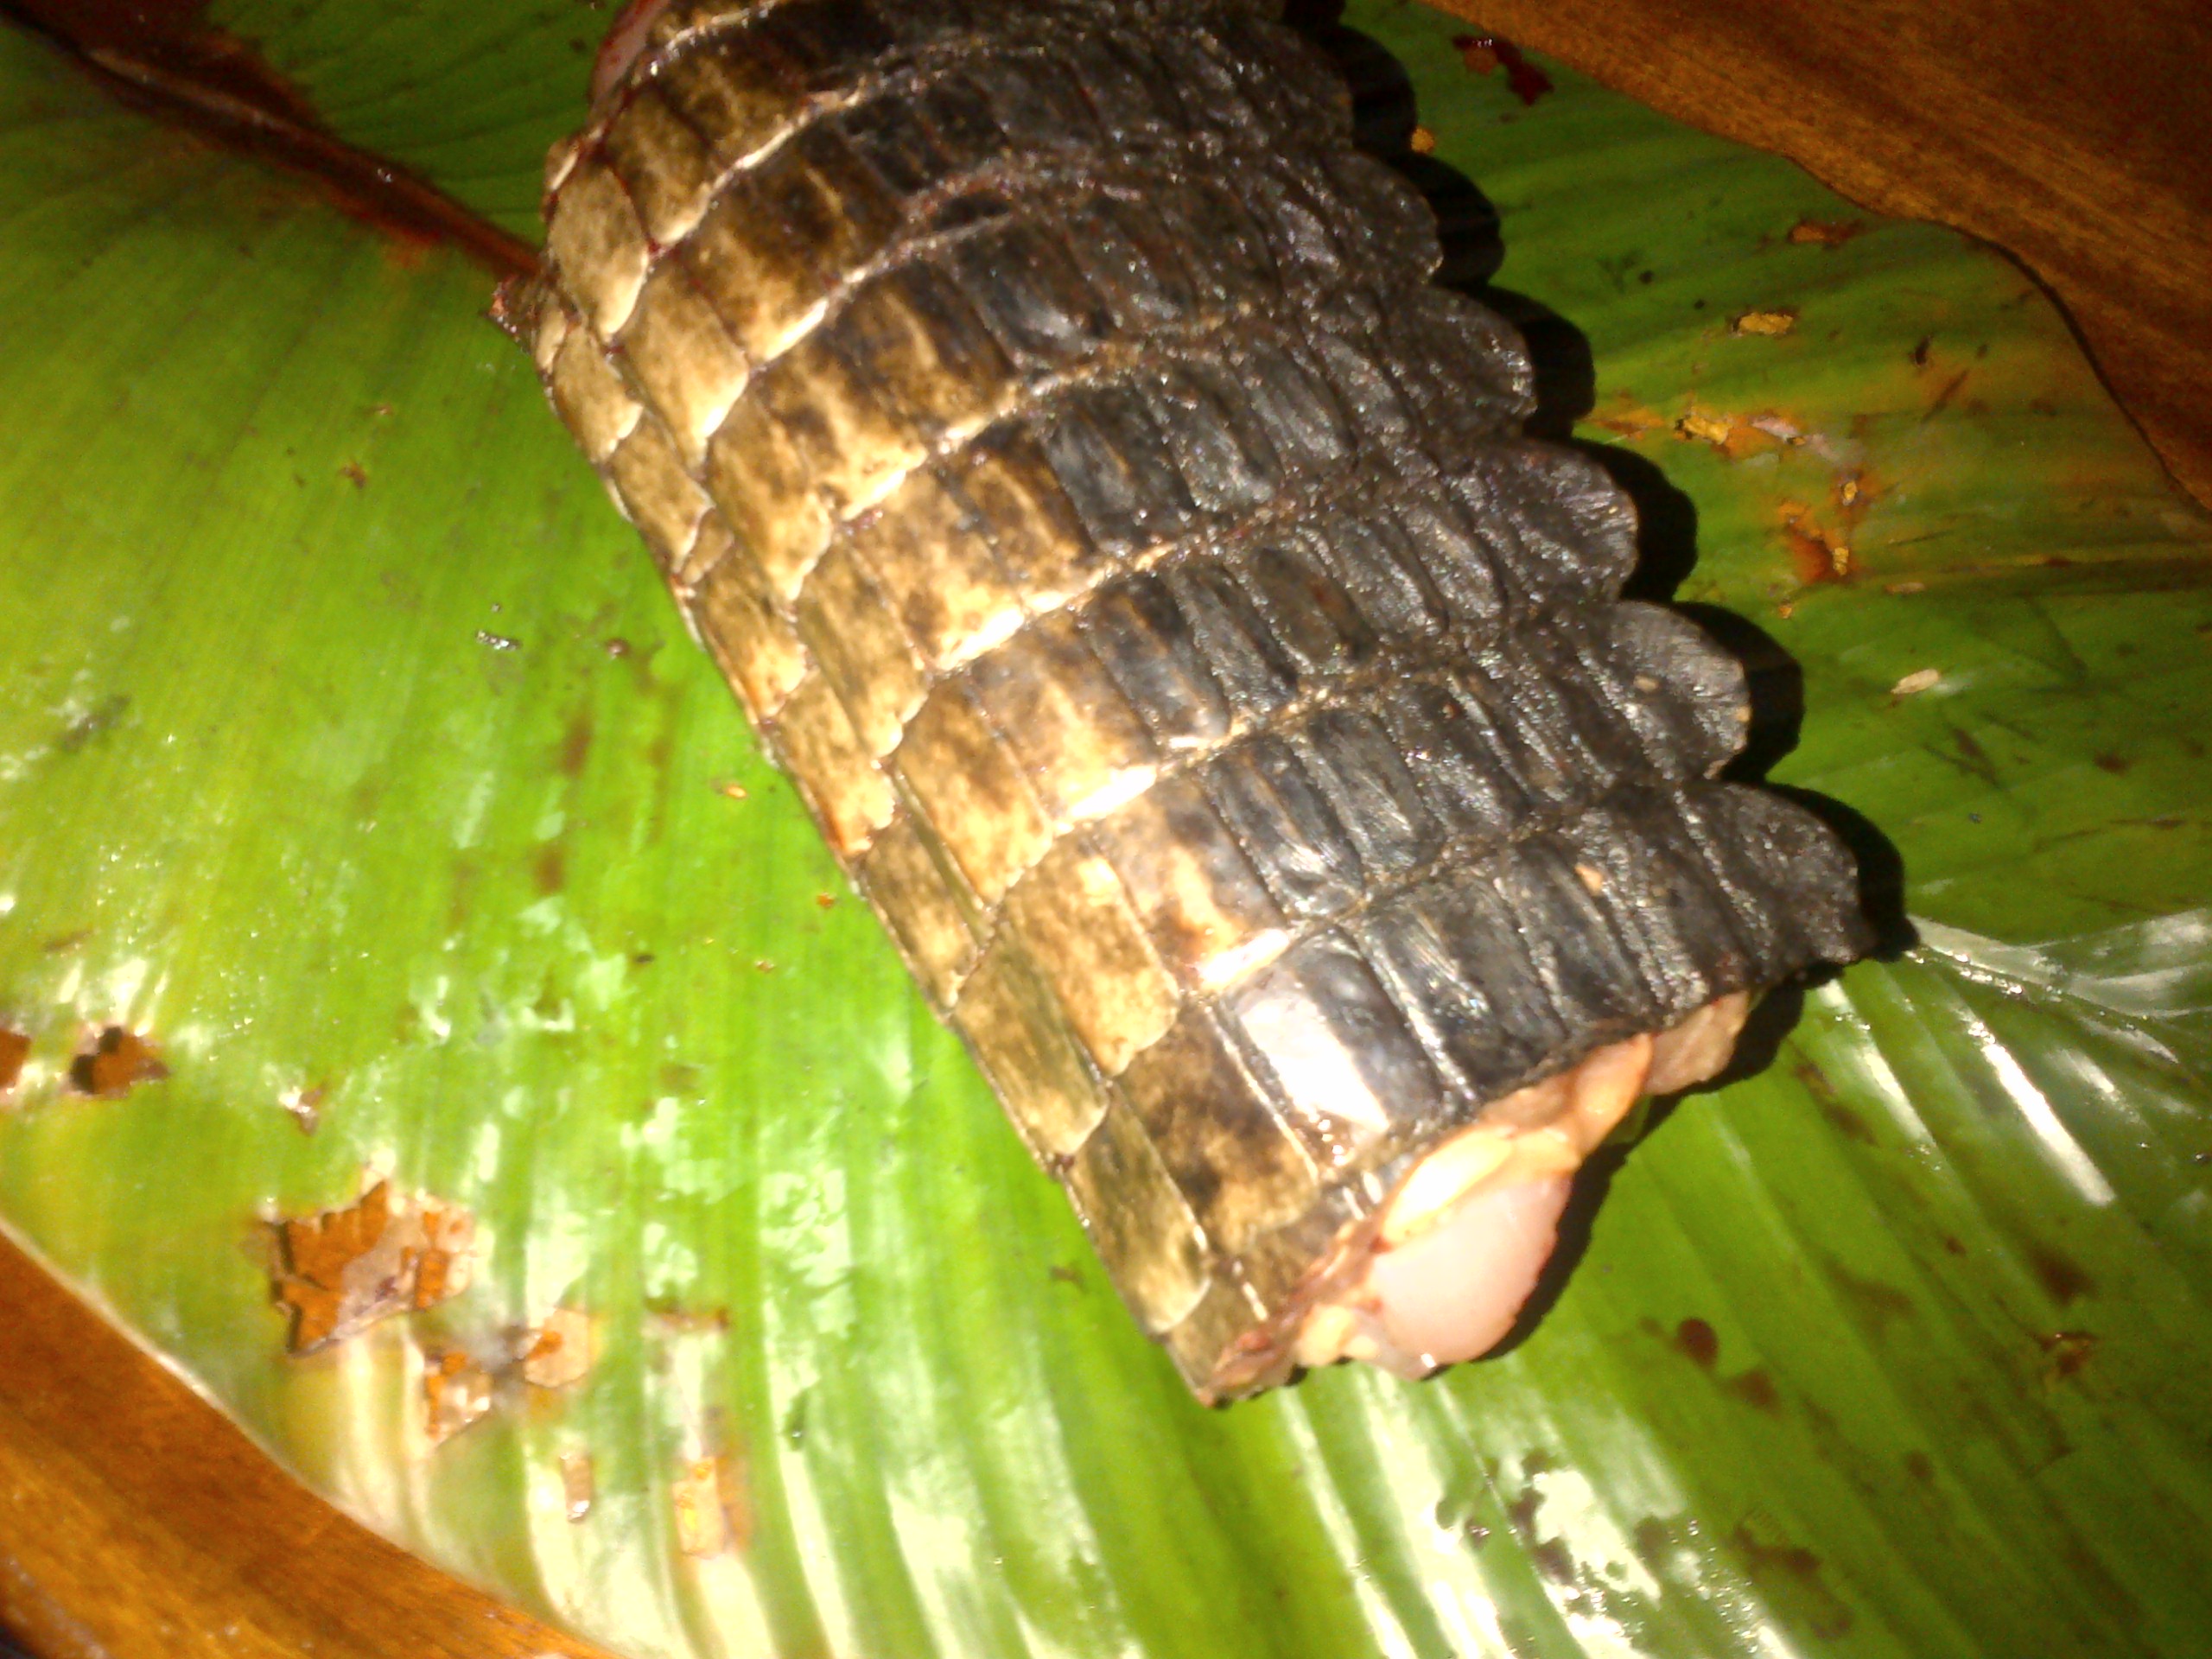 Croc meat wrapped in leaf to take home